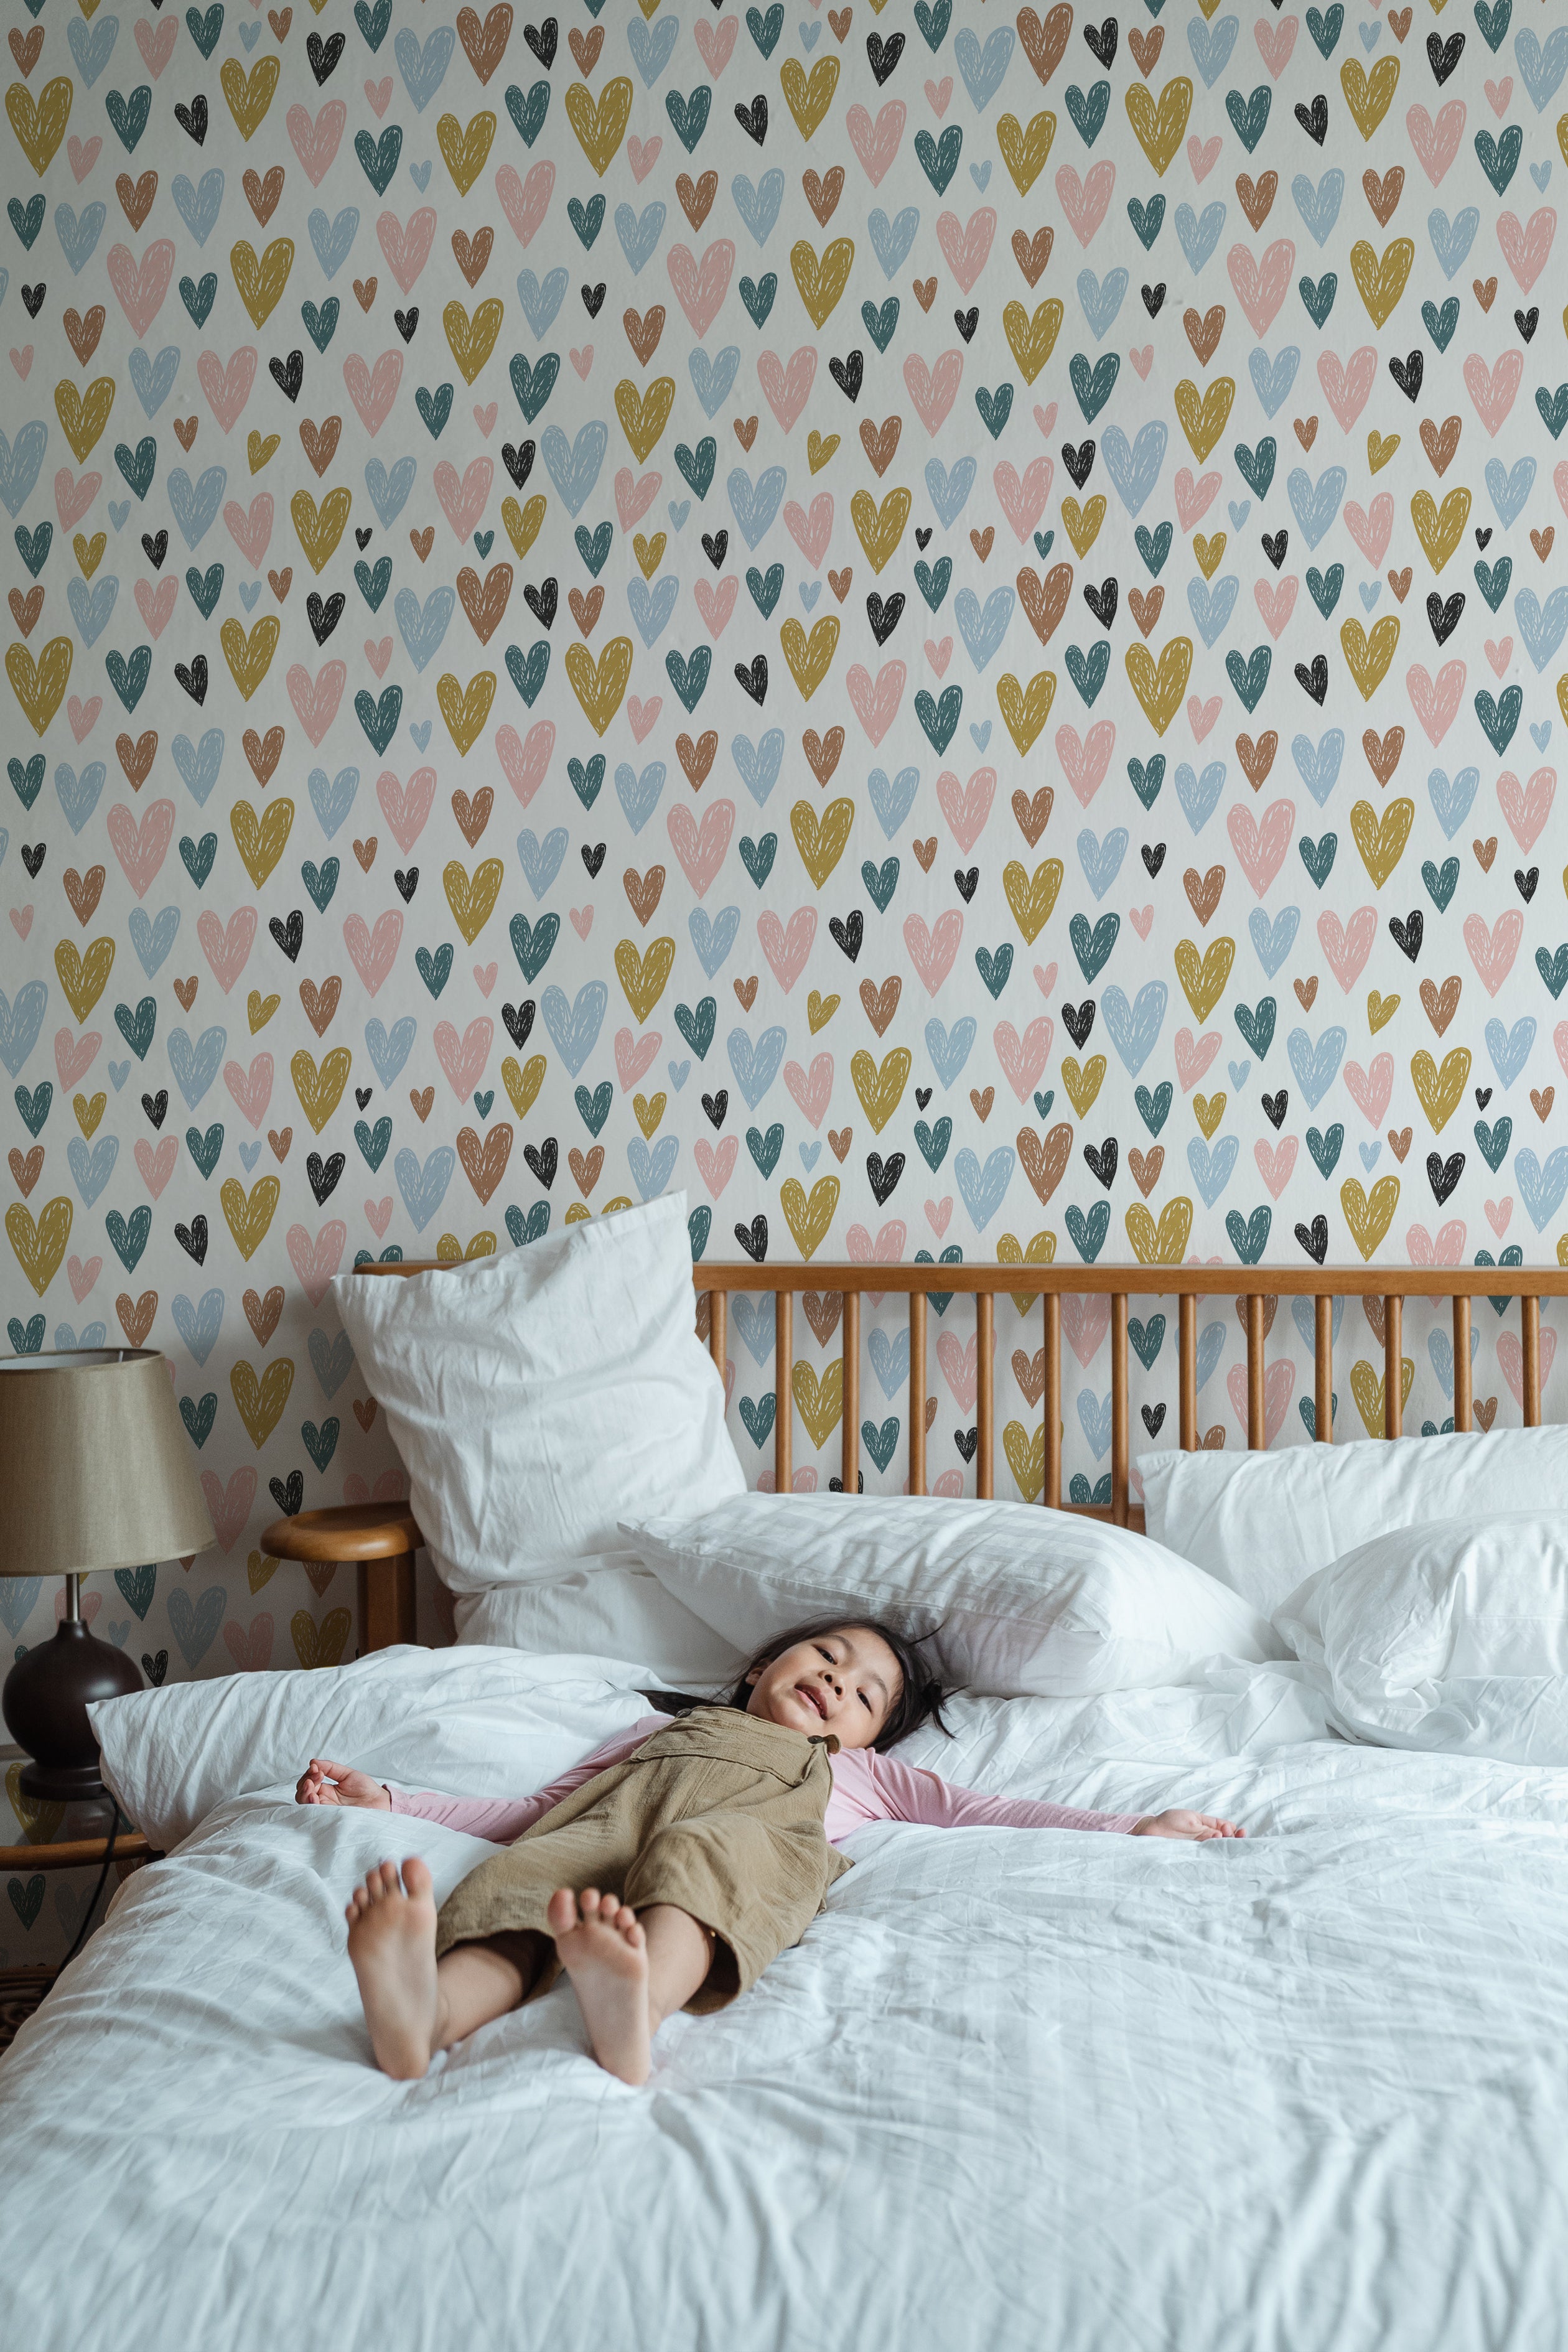 A child lying peacefully on a bed with white bedding in front of a wall decorated with the Amore Wallpaper. The wallpaper features a pattern of multicolored hearts in shades of blue, pink, yellow, and black, creating a playful and loving atmosphere suitable for a child's bedroom.